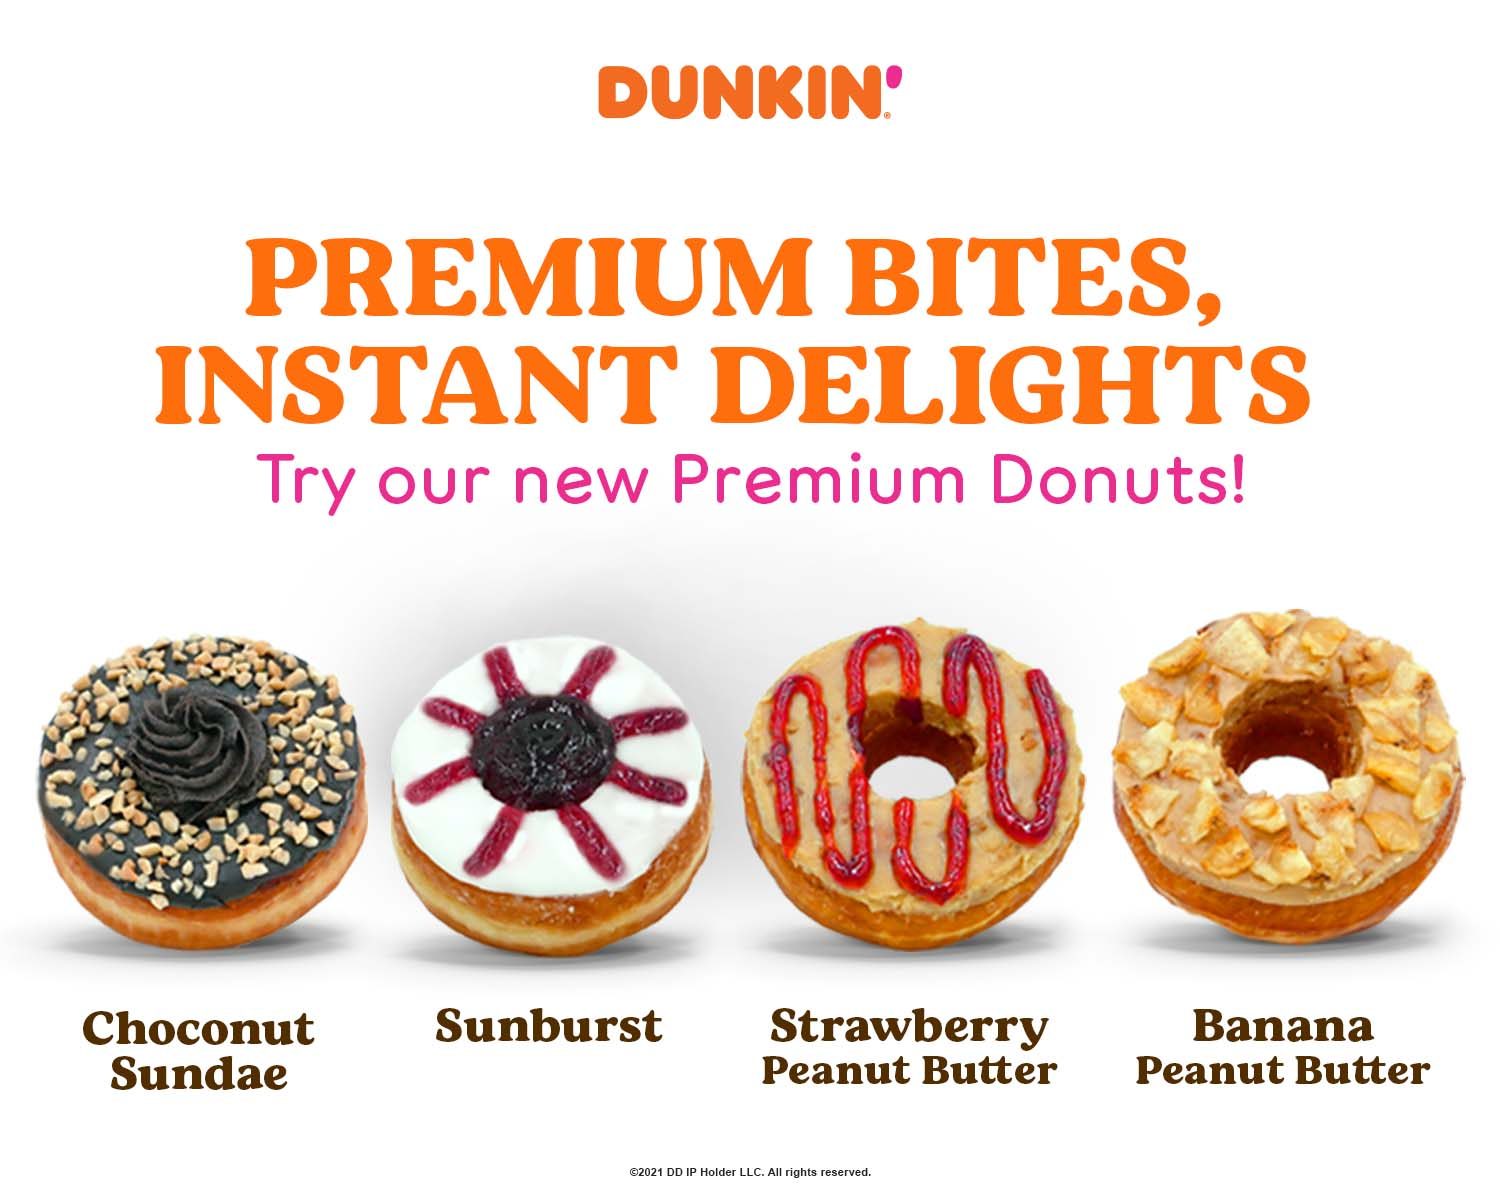 Dunkin’ introduces new Strawberry, Banana Peanut Butter donuts